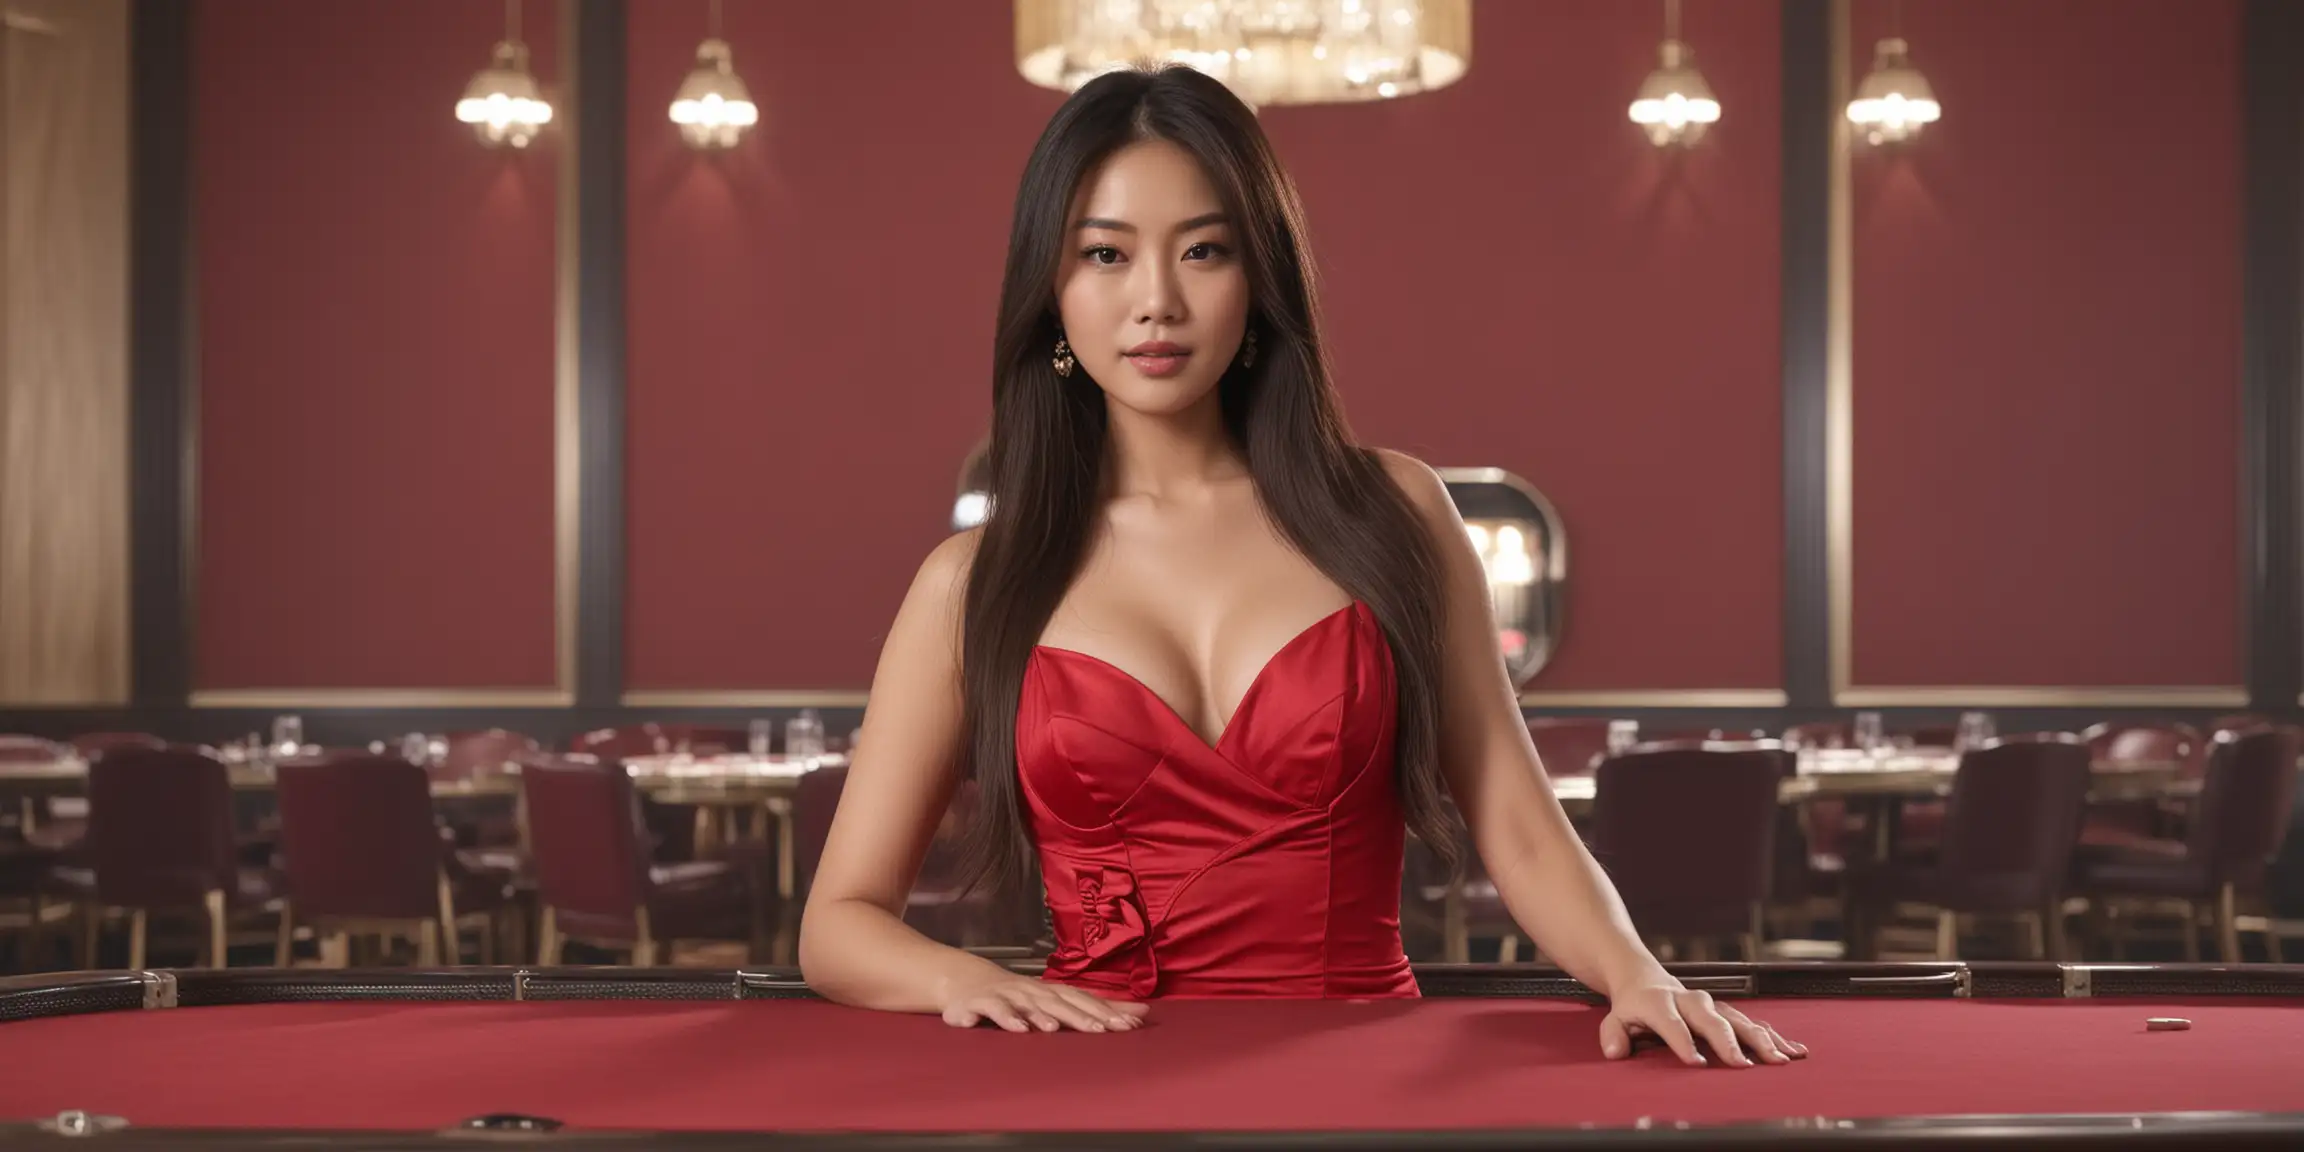 Asian Woman in Cherry Red Dress at Casino Table